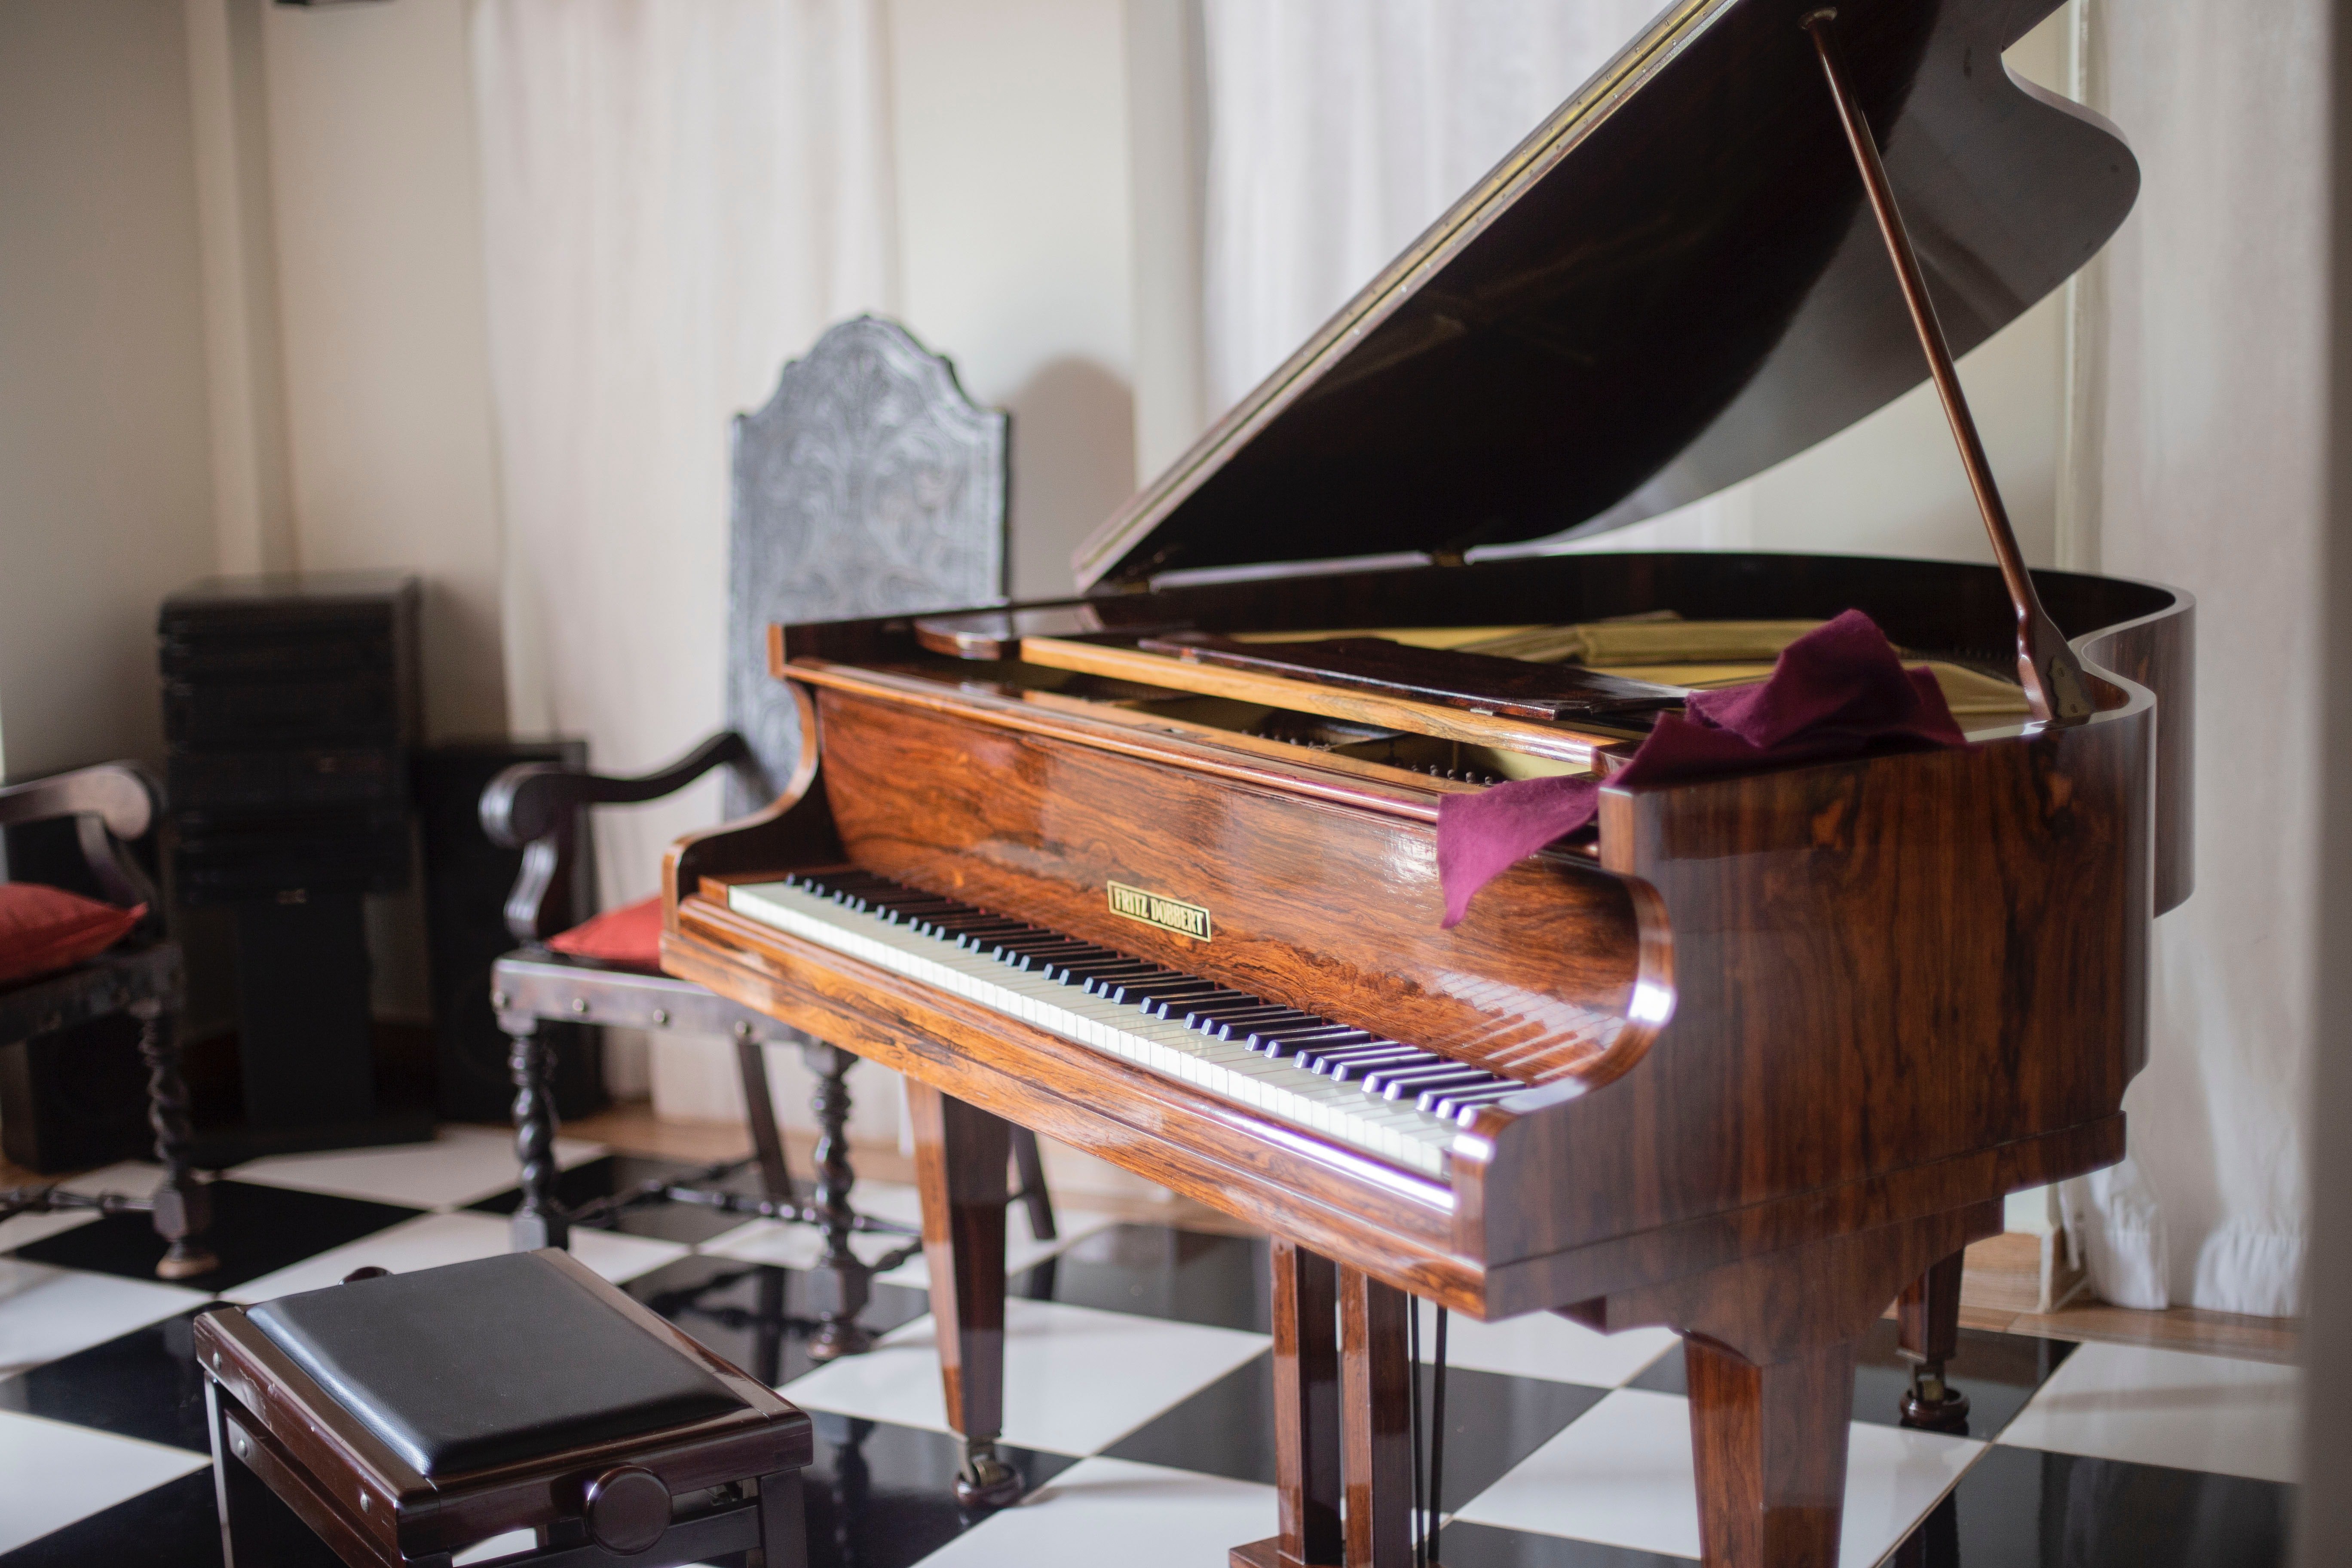 Monica & Janice surprised Charles with a piano. | Source: Pexels